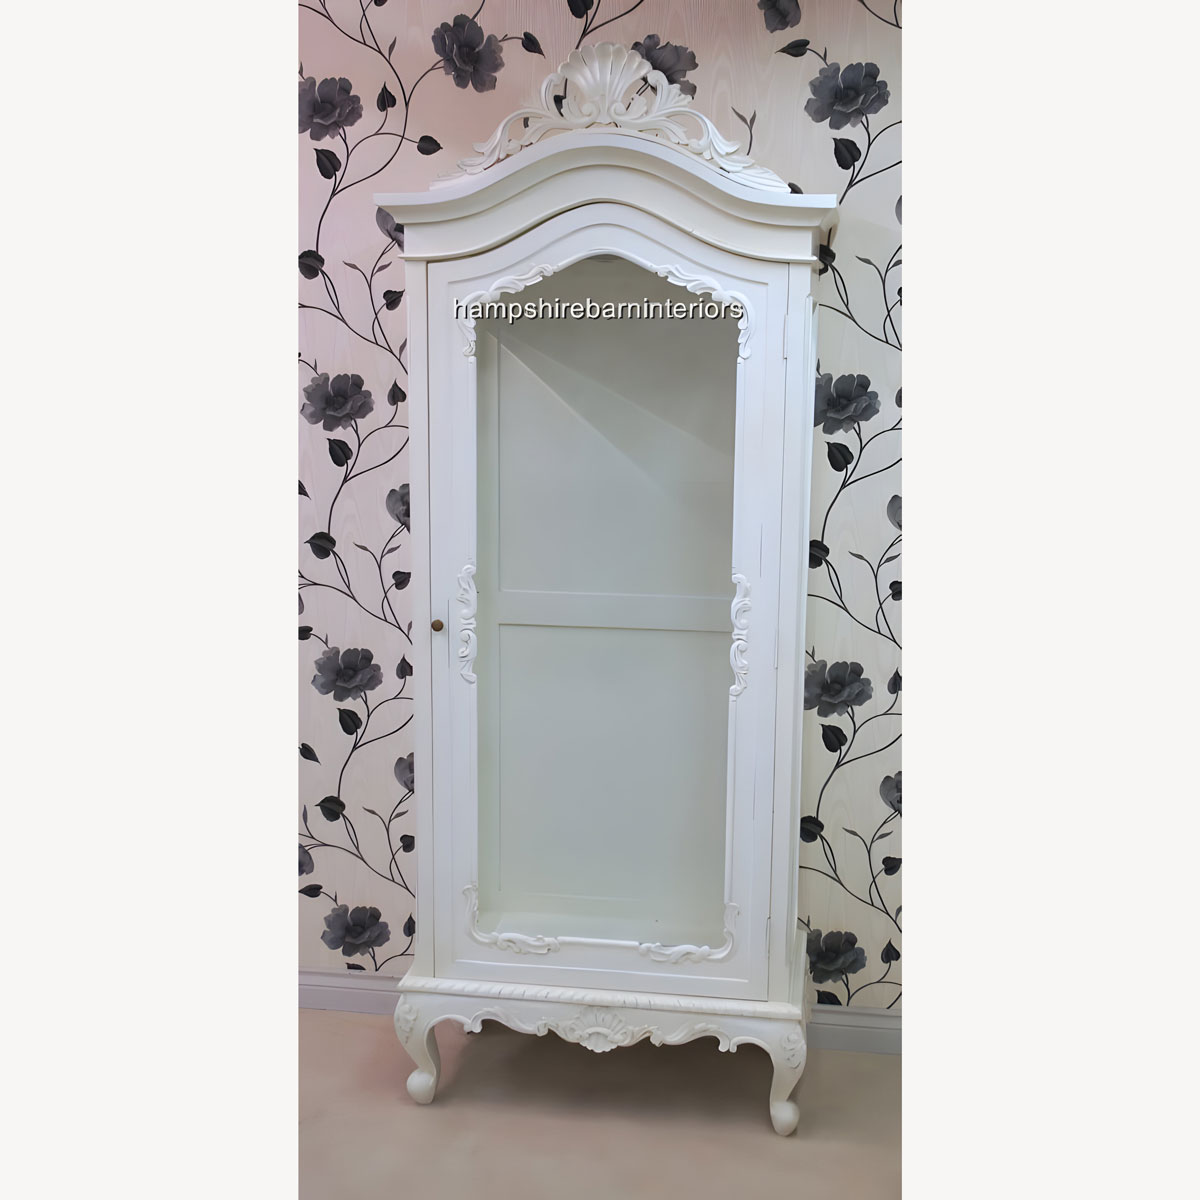 Antique White Display Cabinet Louis Style Wall Unit Display Cabinet French Style Chic Distressed Painted 1 - Hampshire Barn Interiors - Antique White Display Cabinet Louis Style Wall Unit Display Cabinet French Style Chic Distressed Painted -